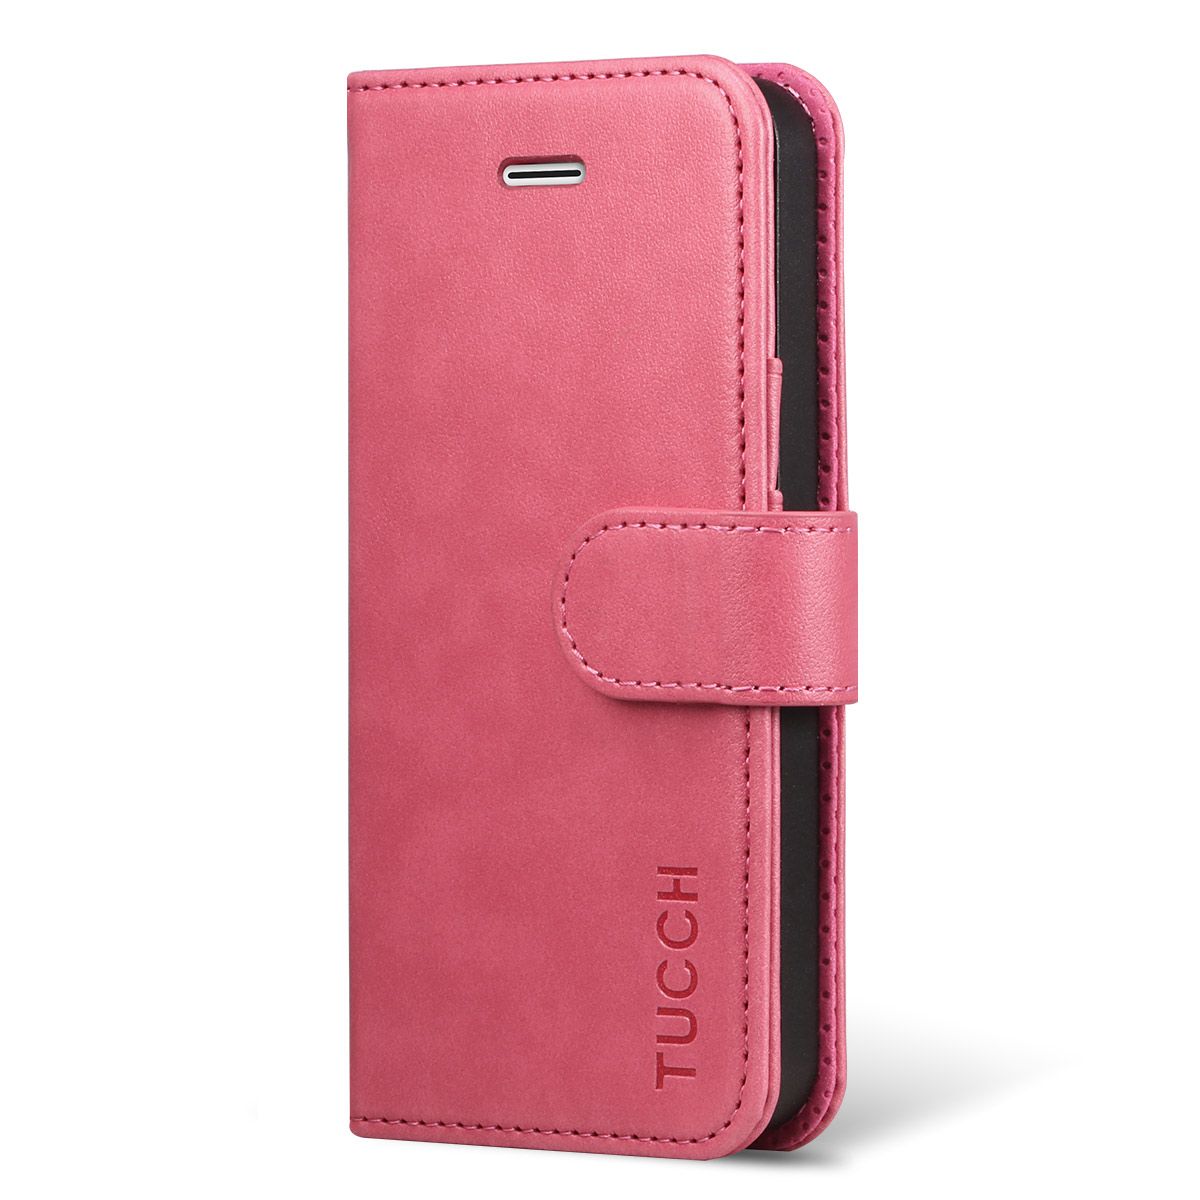 TUCCH iPhone Case, Case, iphone 5 Case, Flip Leather